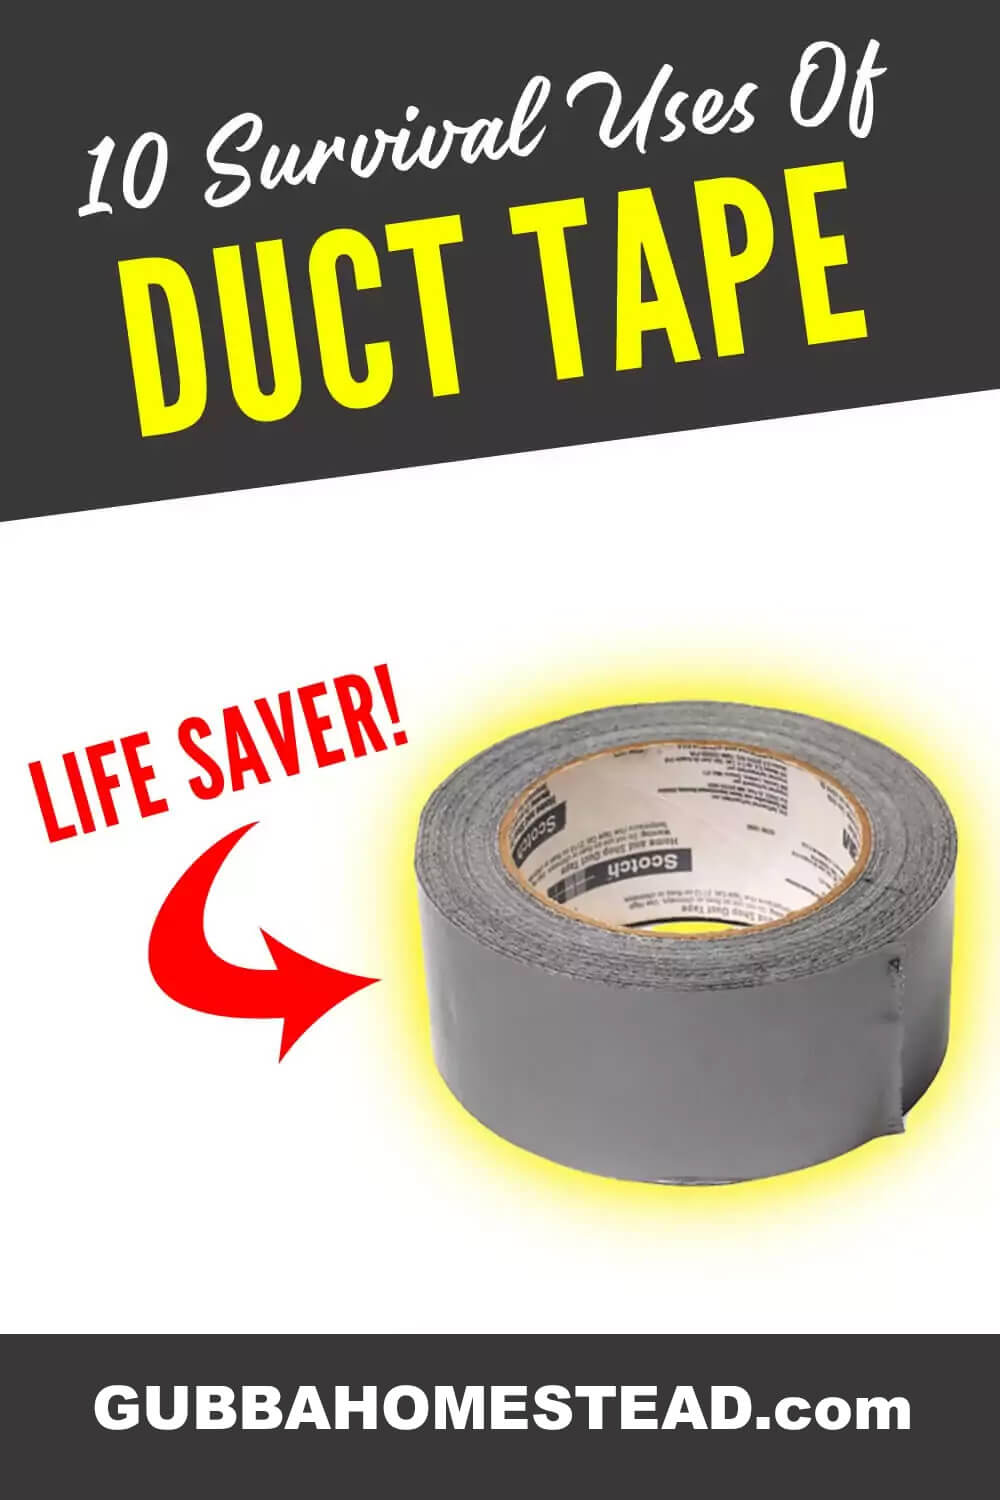 10 Survival Uses Of Duct Tape